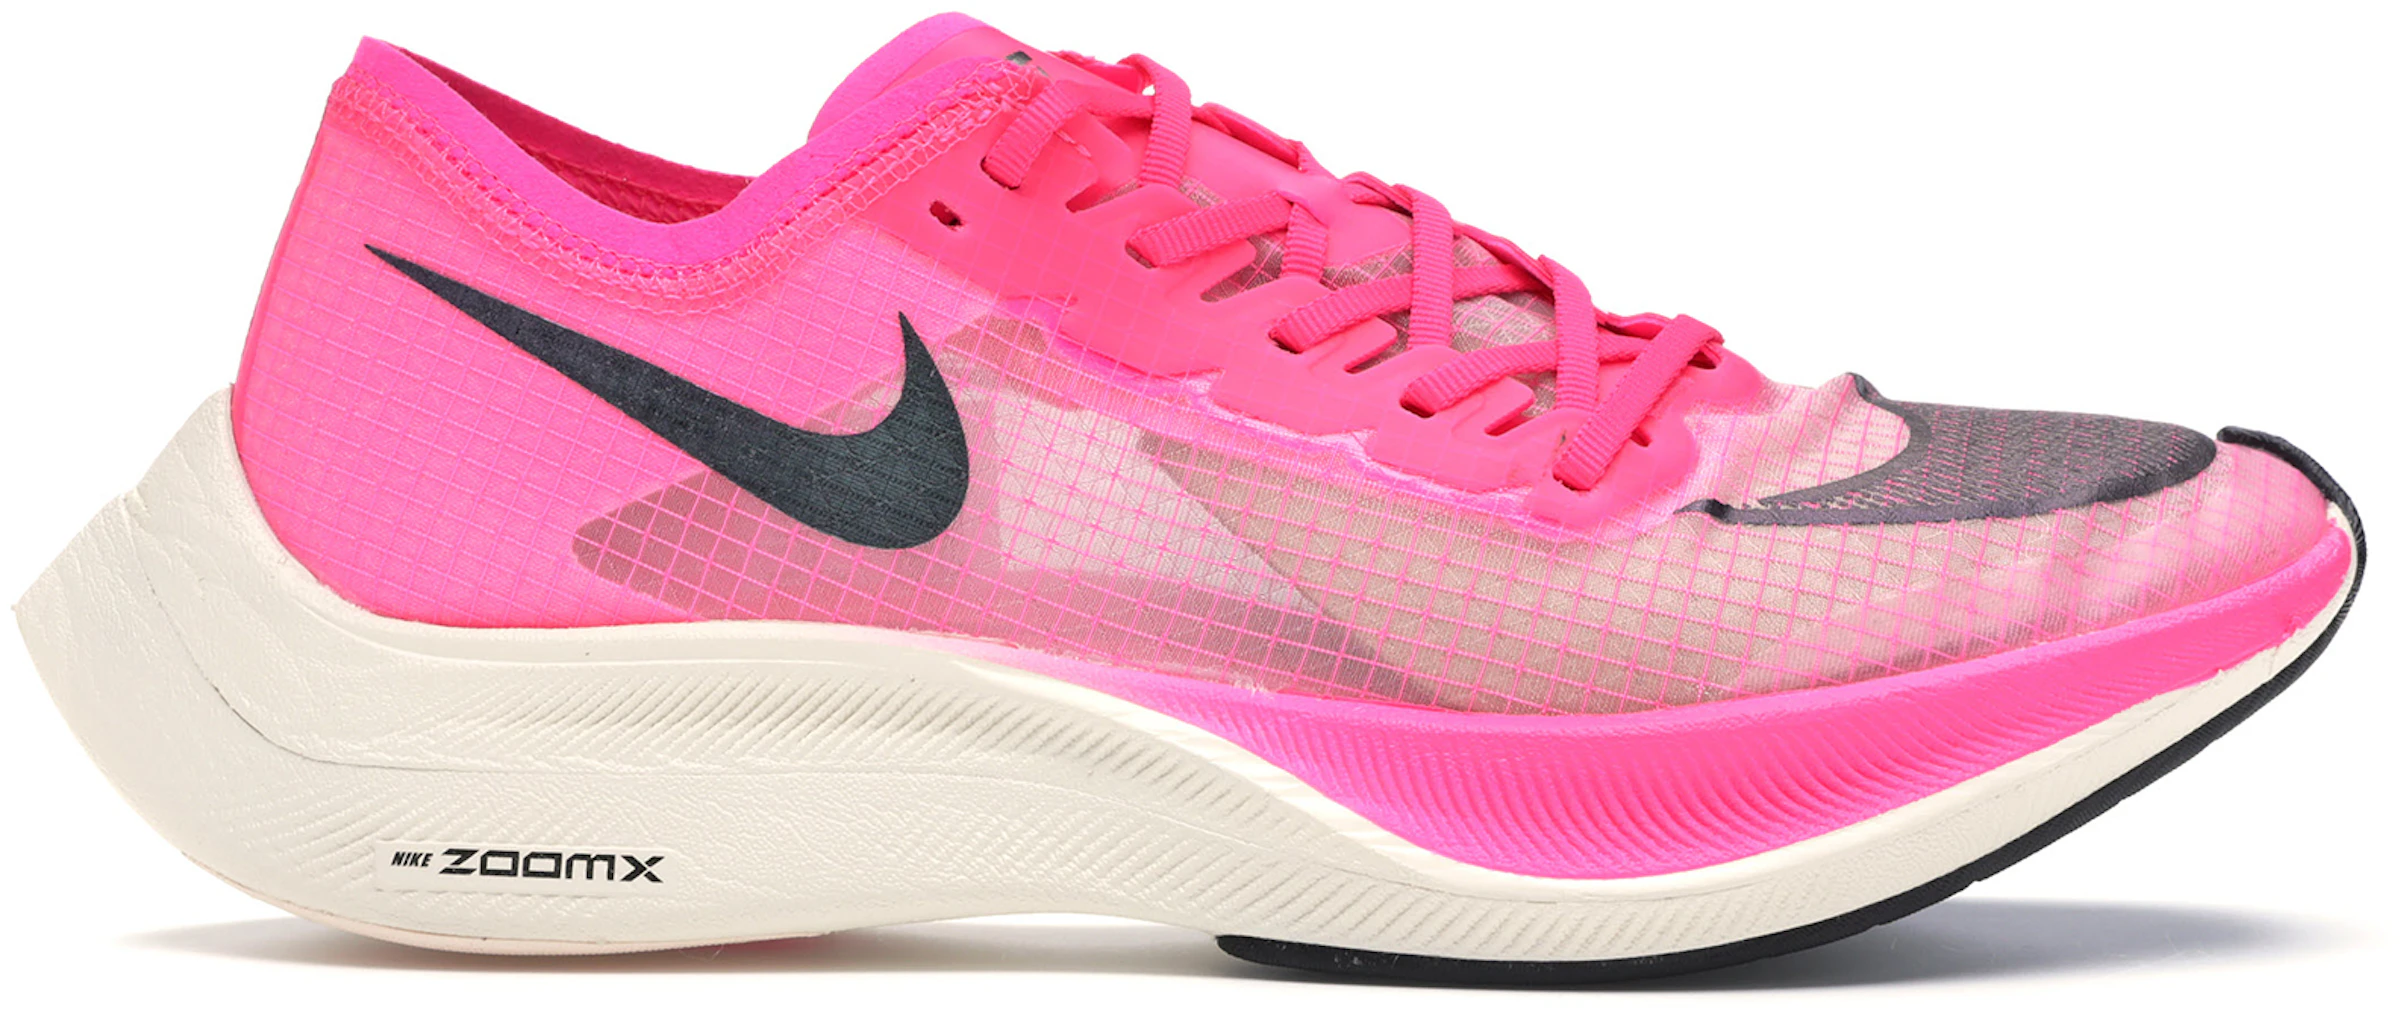 Nike ZoomX Vaporfly Next% Pink - AO4568-600 ES